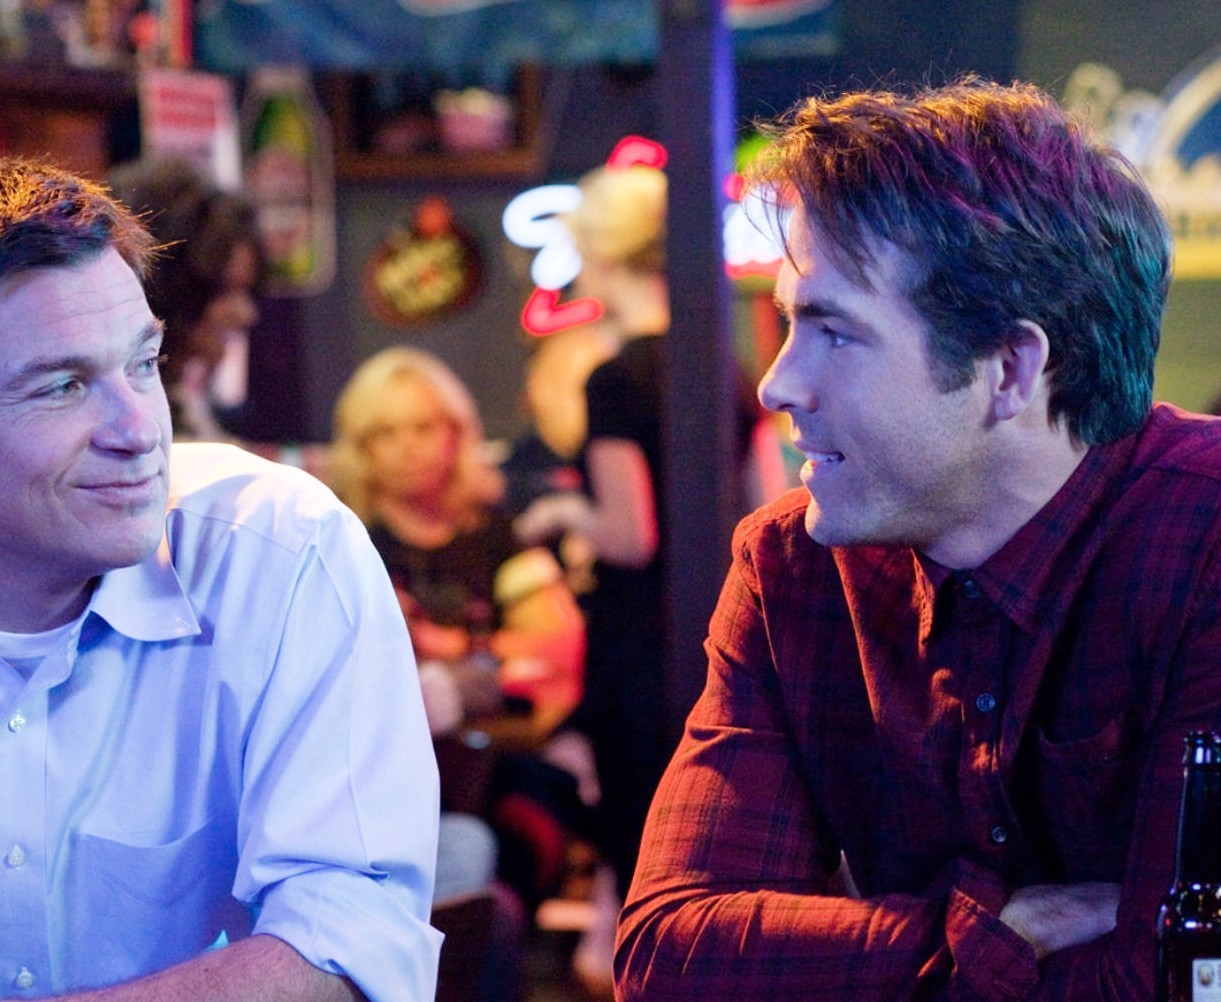 Jason Bateman stars as Dave and Ryan Reynolds stars as Mitch in Universal Pictures' The Change-Up (2011)